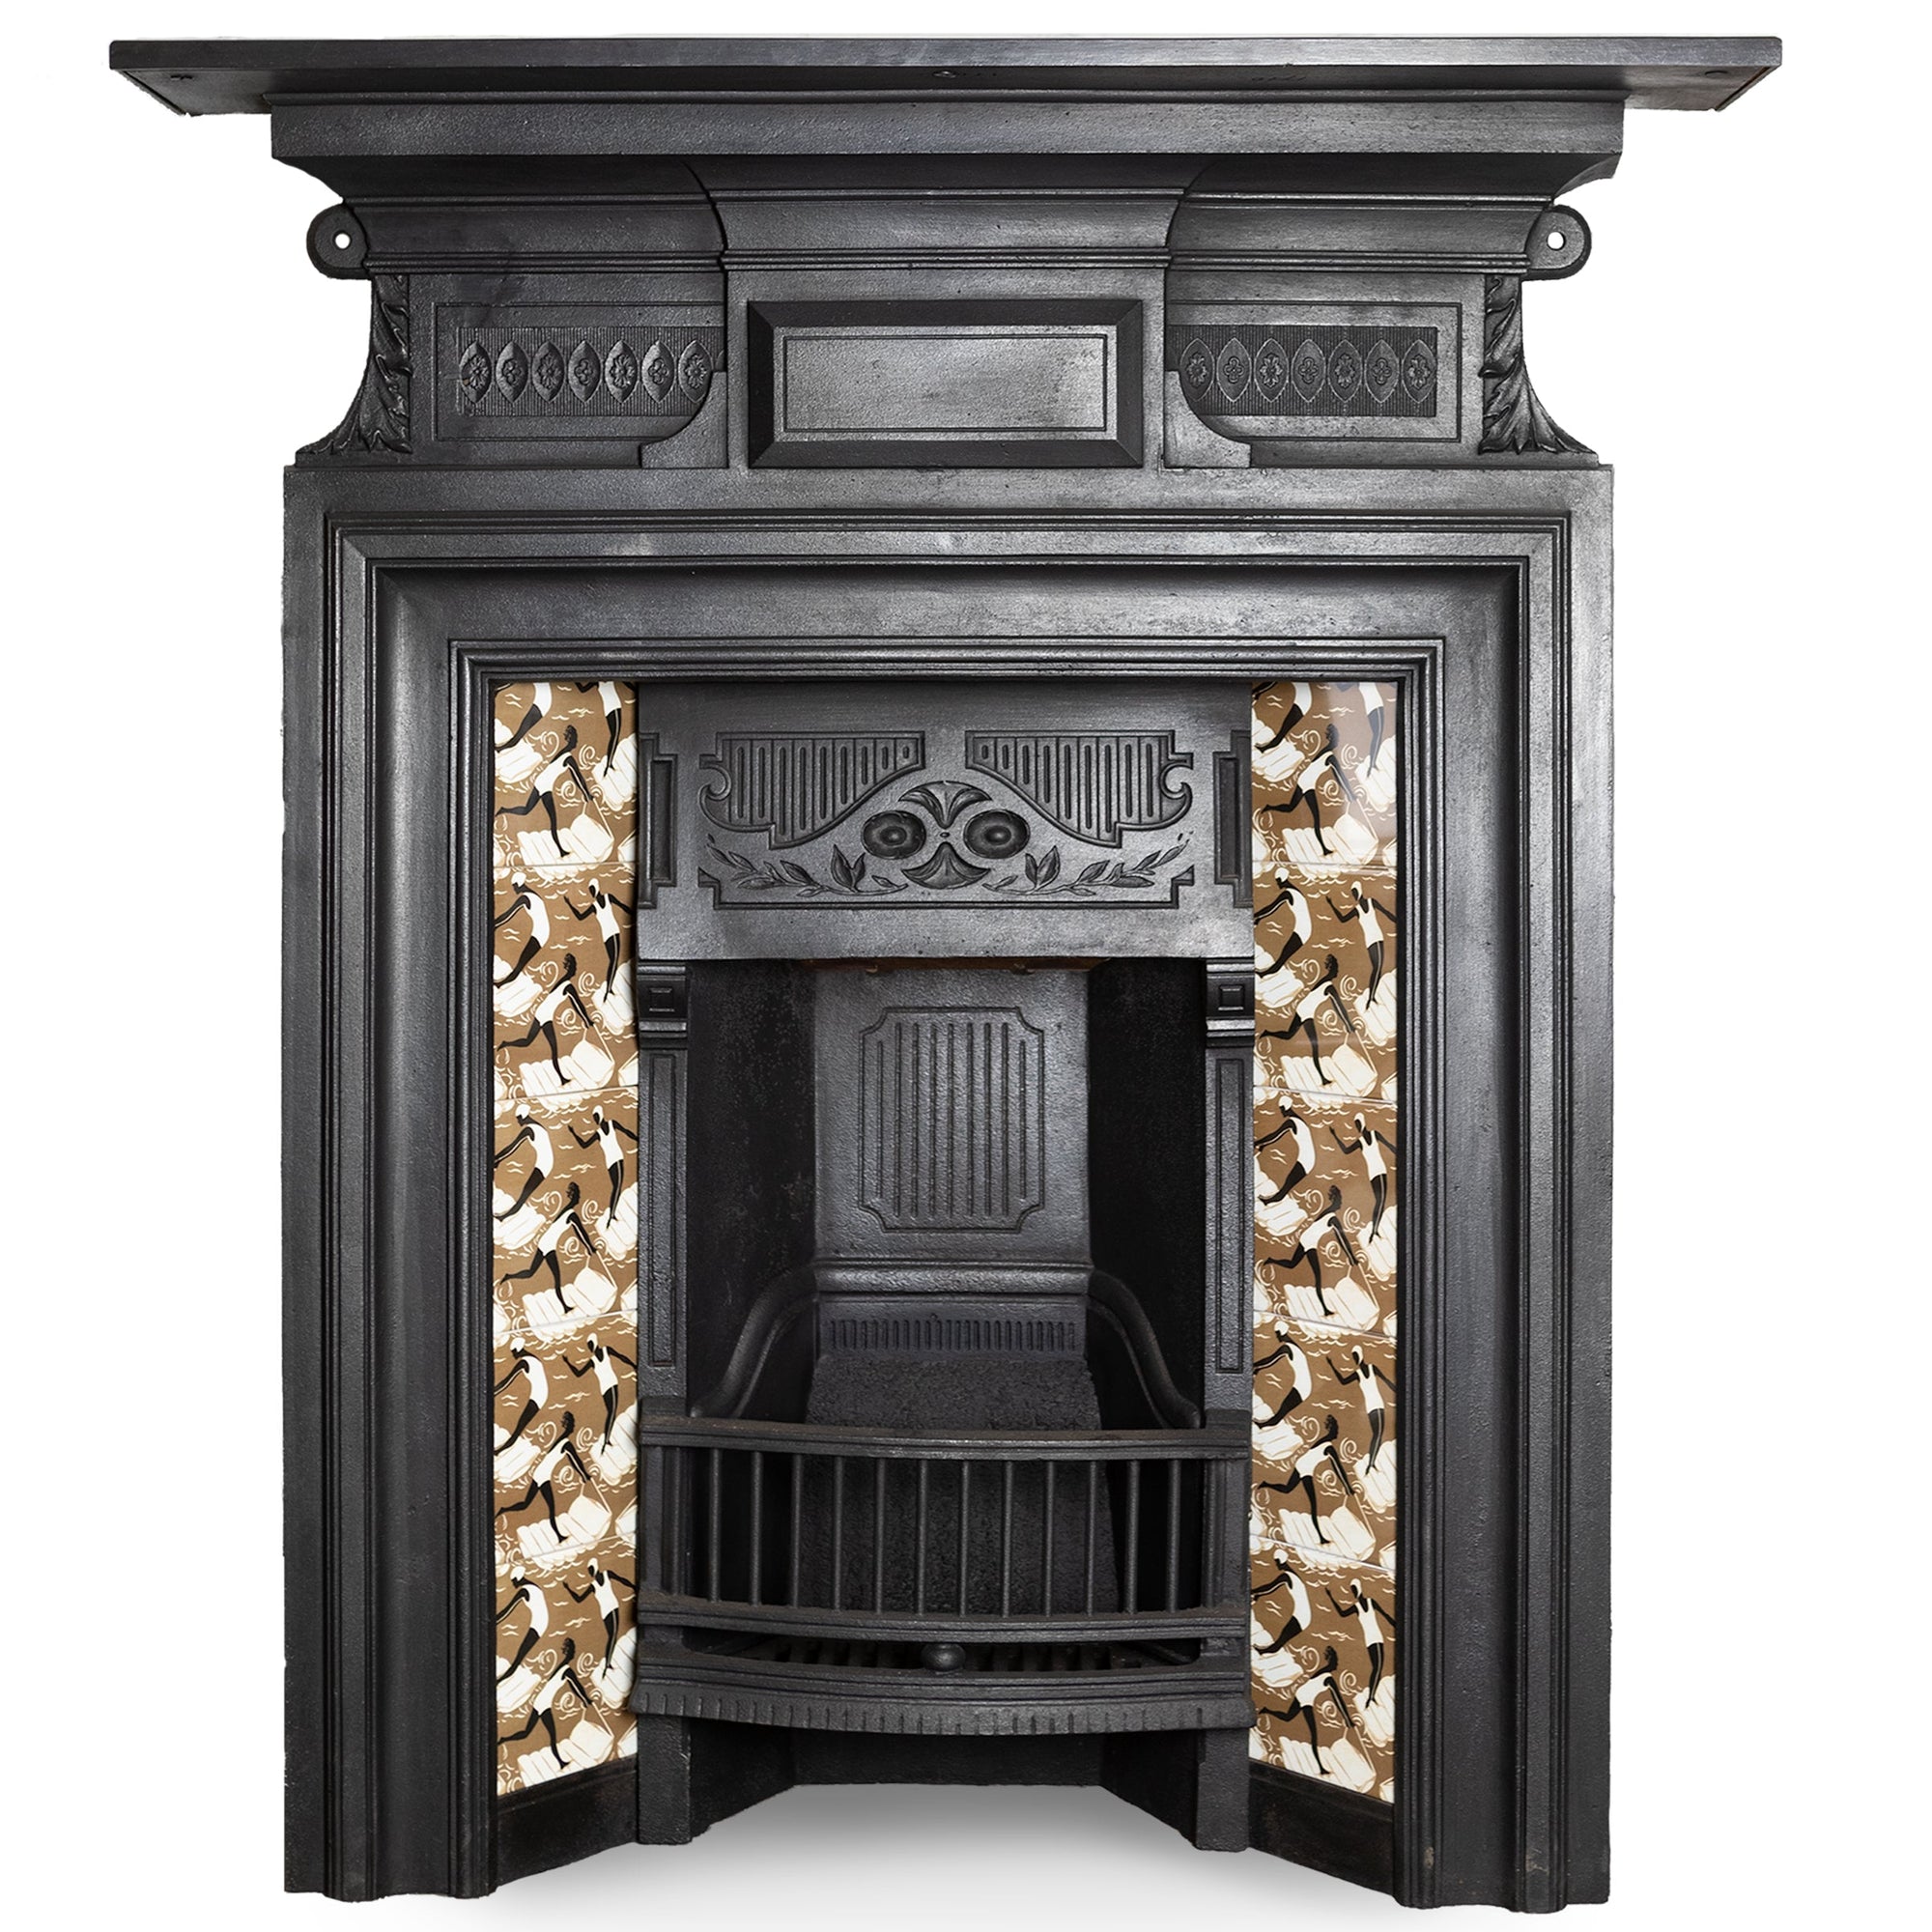 Antique Cast Iron Combination Fireplace with Swimming Lady Tiles | The Architectural Forum